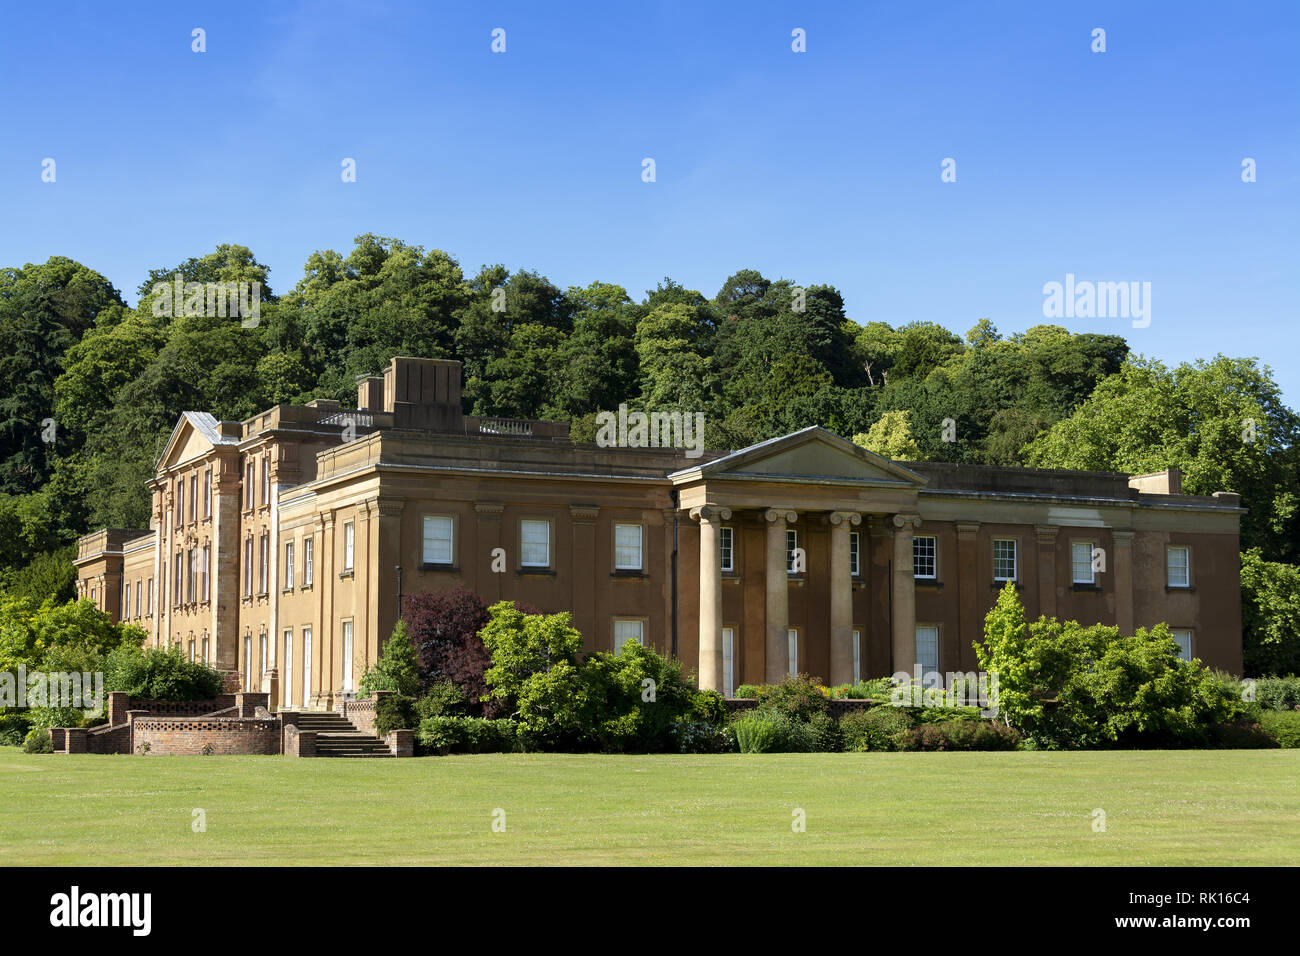 Summertime at Himley Hall near Dudley in the West Midlands, England, UK Stock Photo